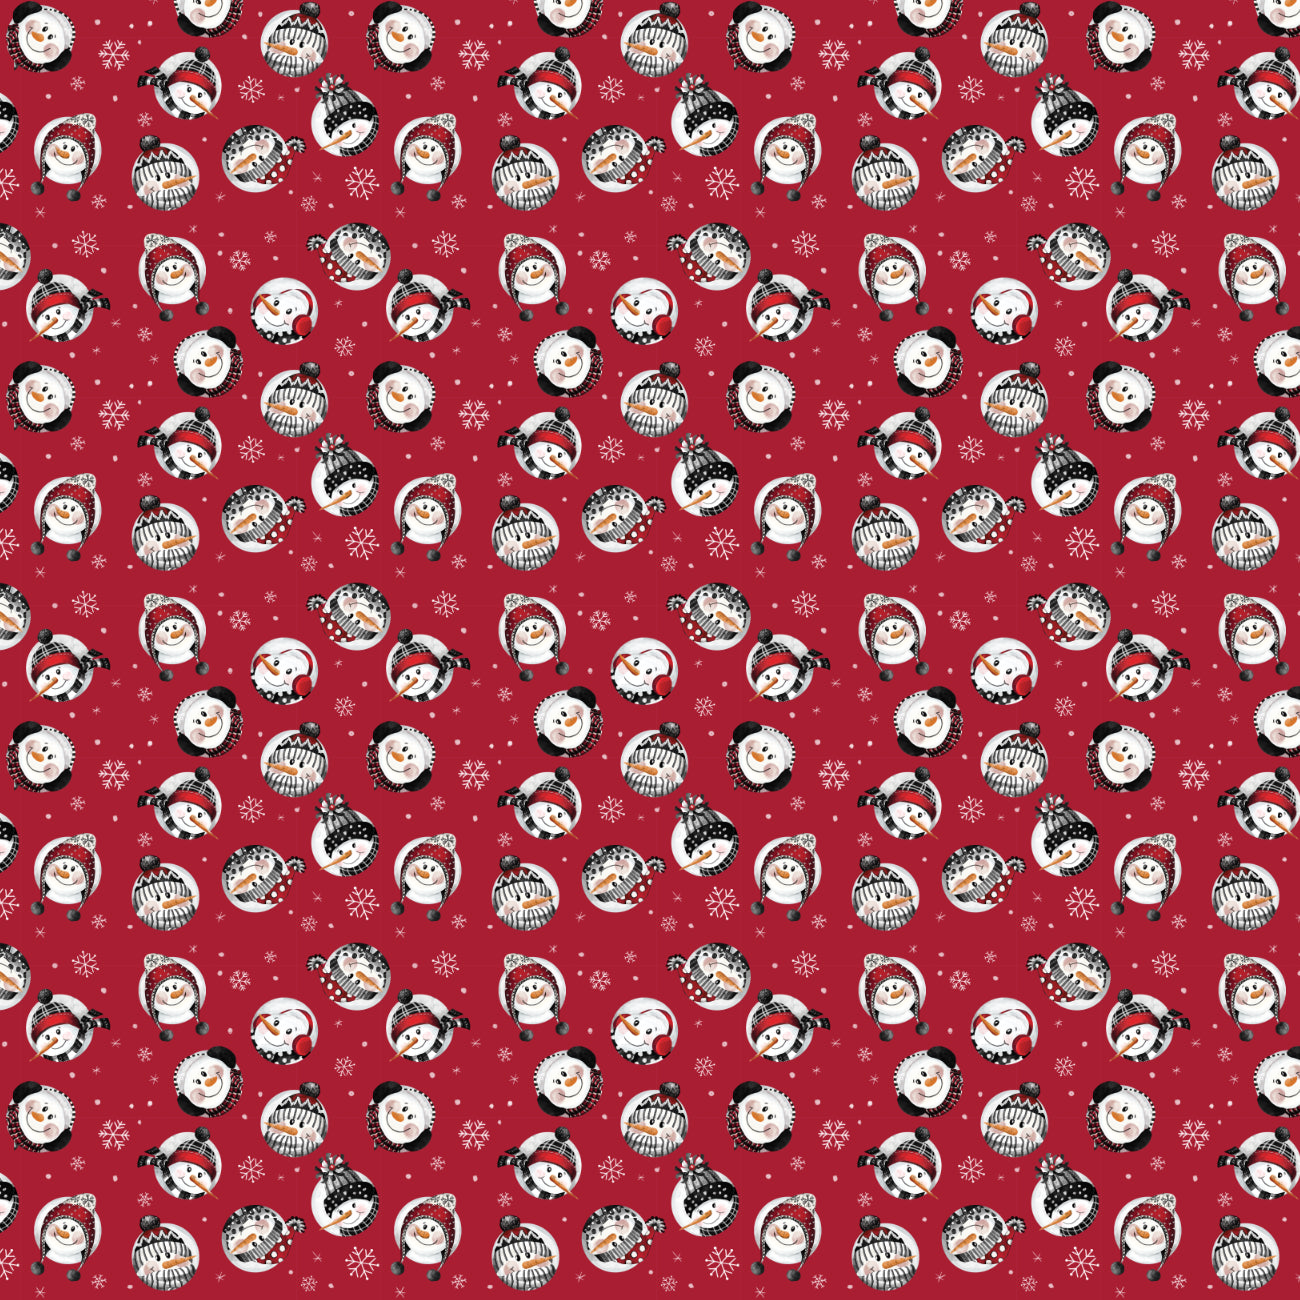 Comfort and Joy Collection-Snowballs-100% Cotton-Red-49230103-02